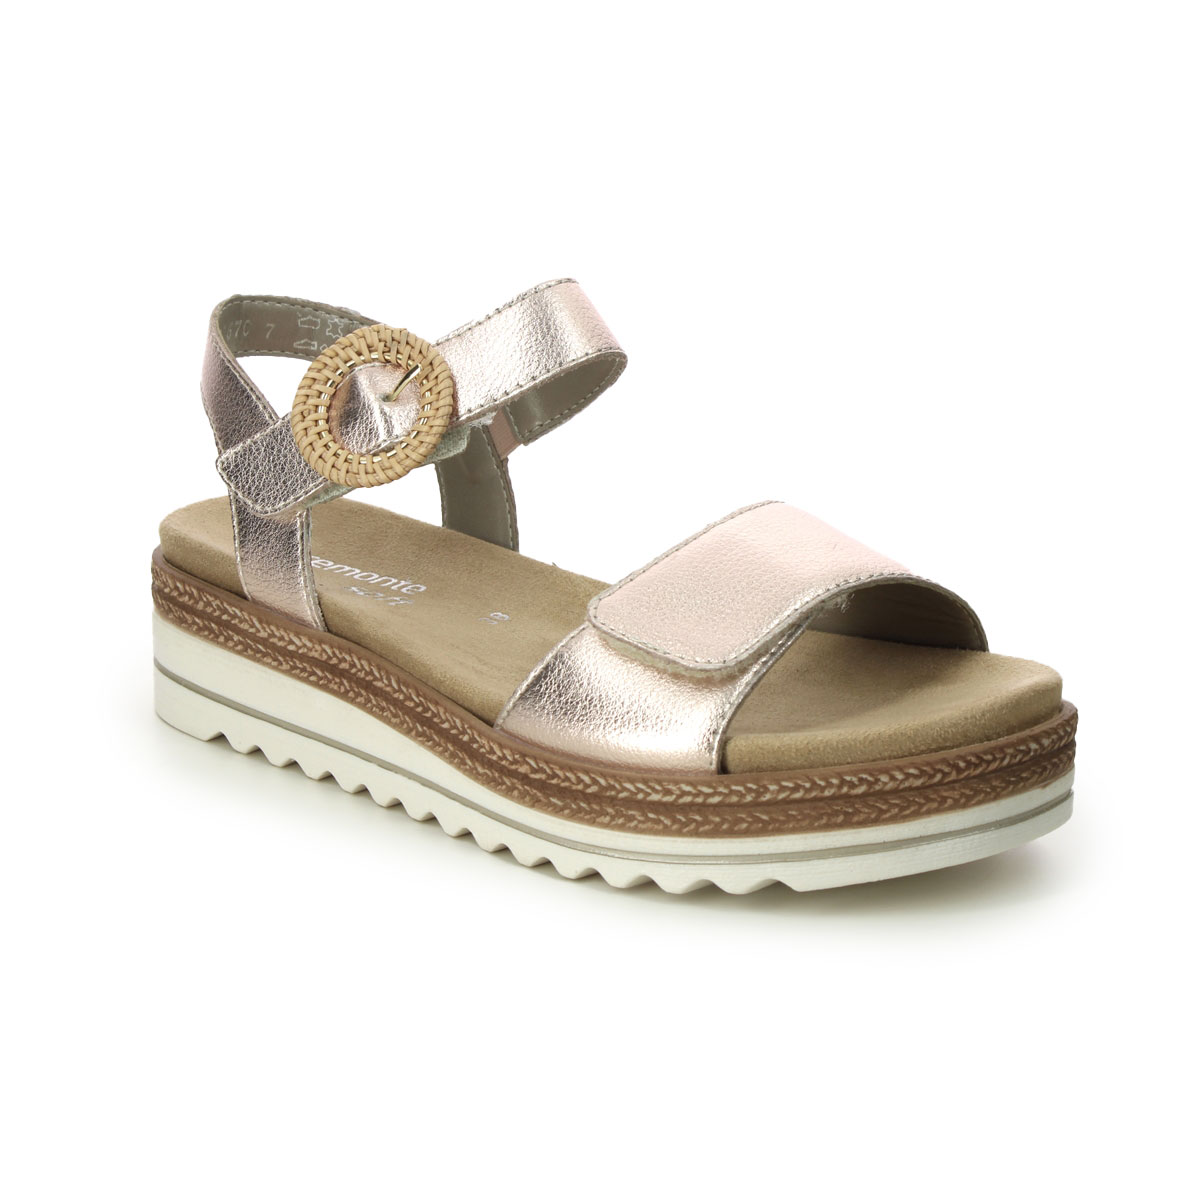 Remonte D0Q52-31 Bily  Flatform Platinum Womens Wedge Sandals in a Plain Leather in Size 40